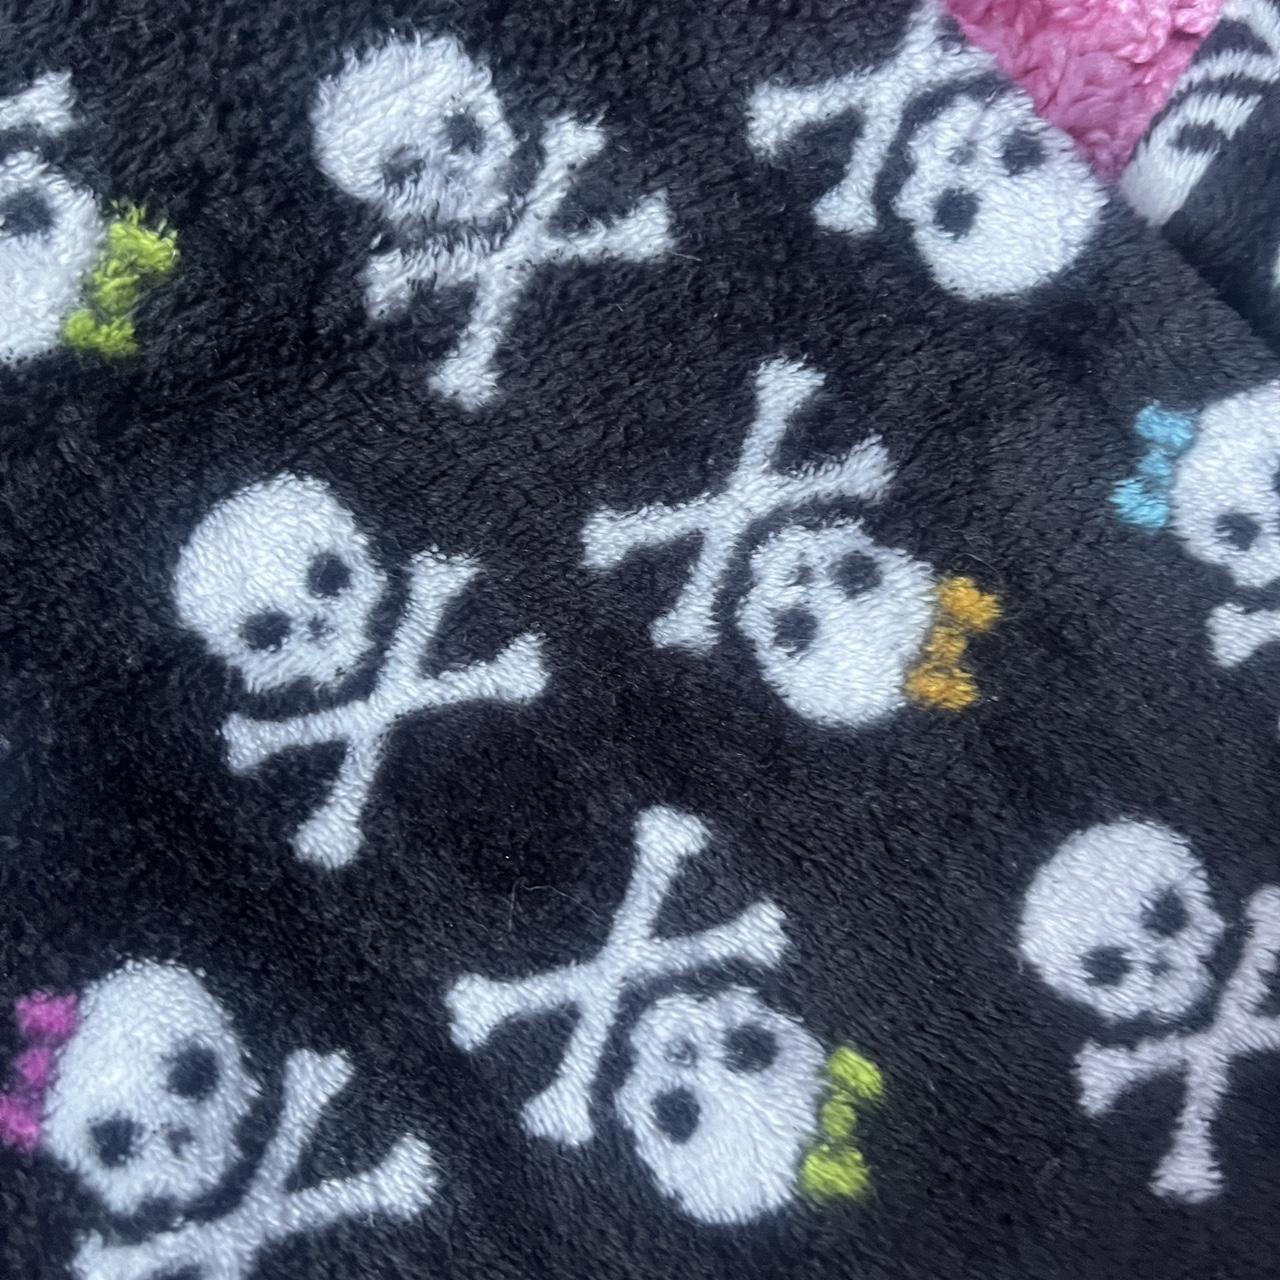 Skull PJ Pants Size small. Excellent condition, no... - Depop